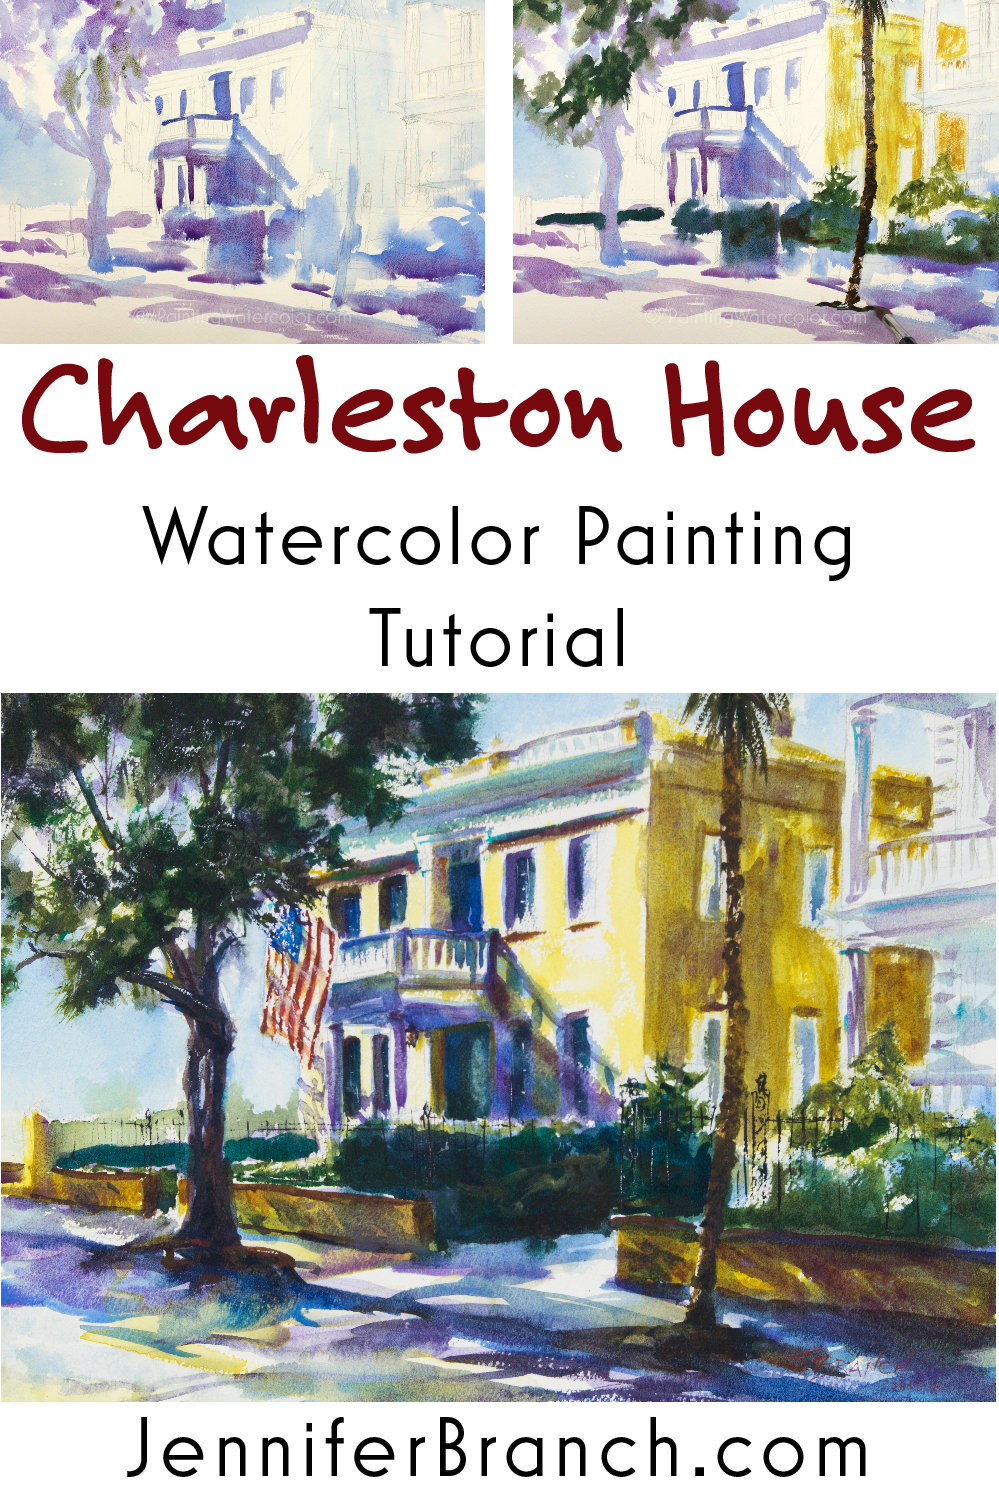 Charleston Watercolor watercolor painting tutorial by Jennifer Branch